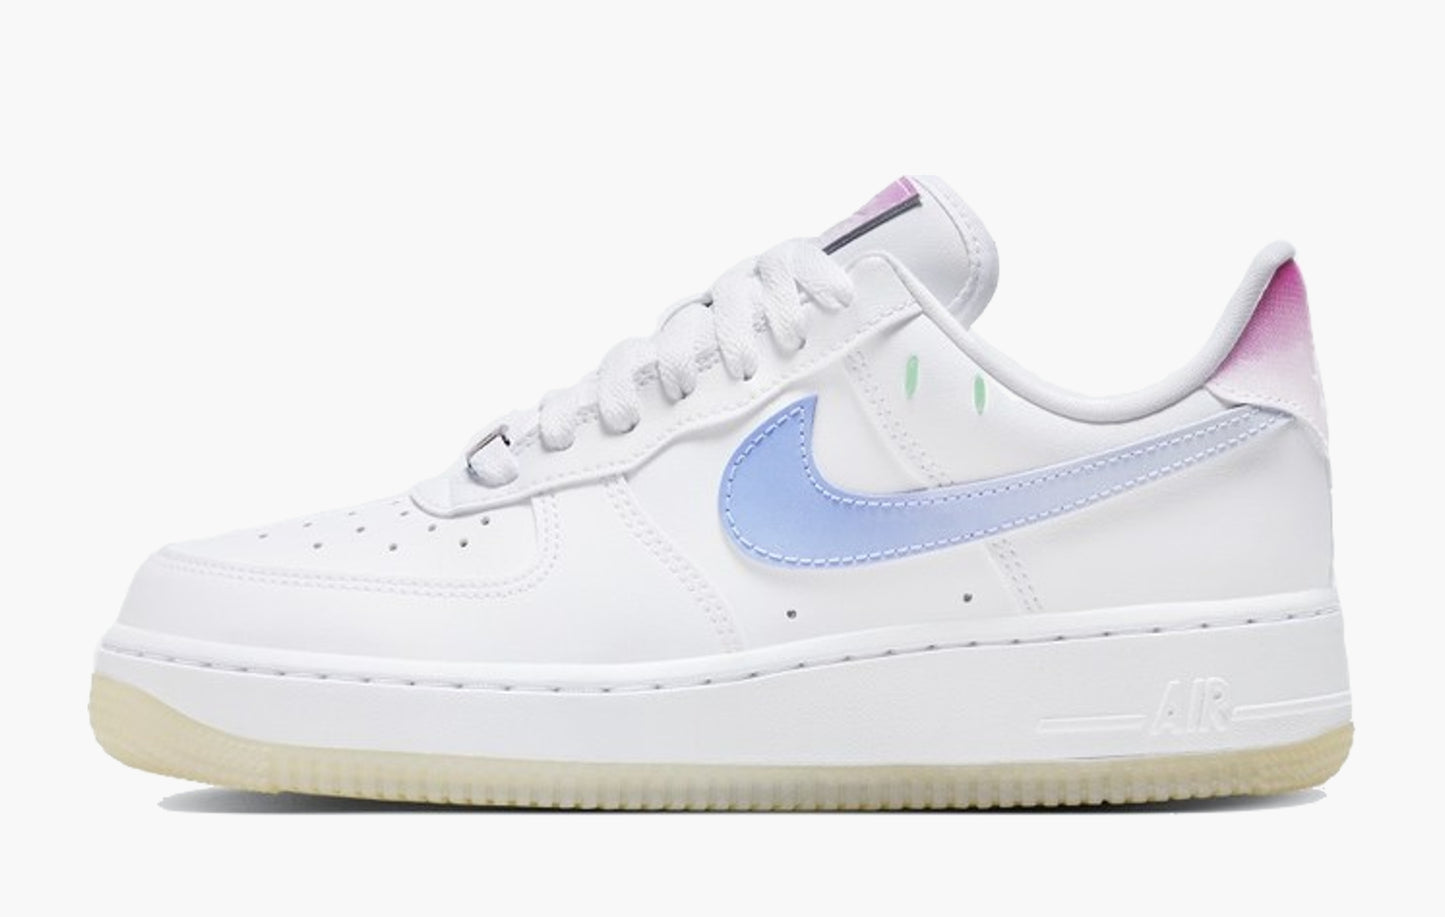 Air Force 1 Low LX UV WMNS Swooshes - FZ5531 111 | The Sortage